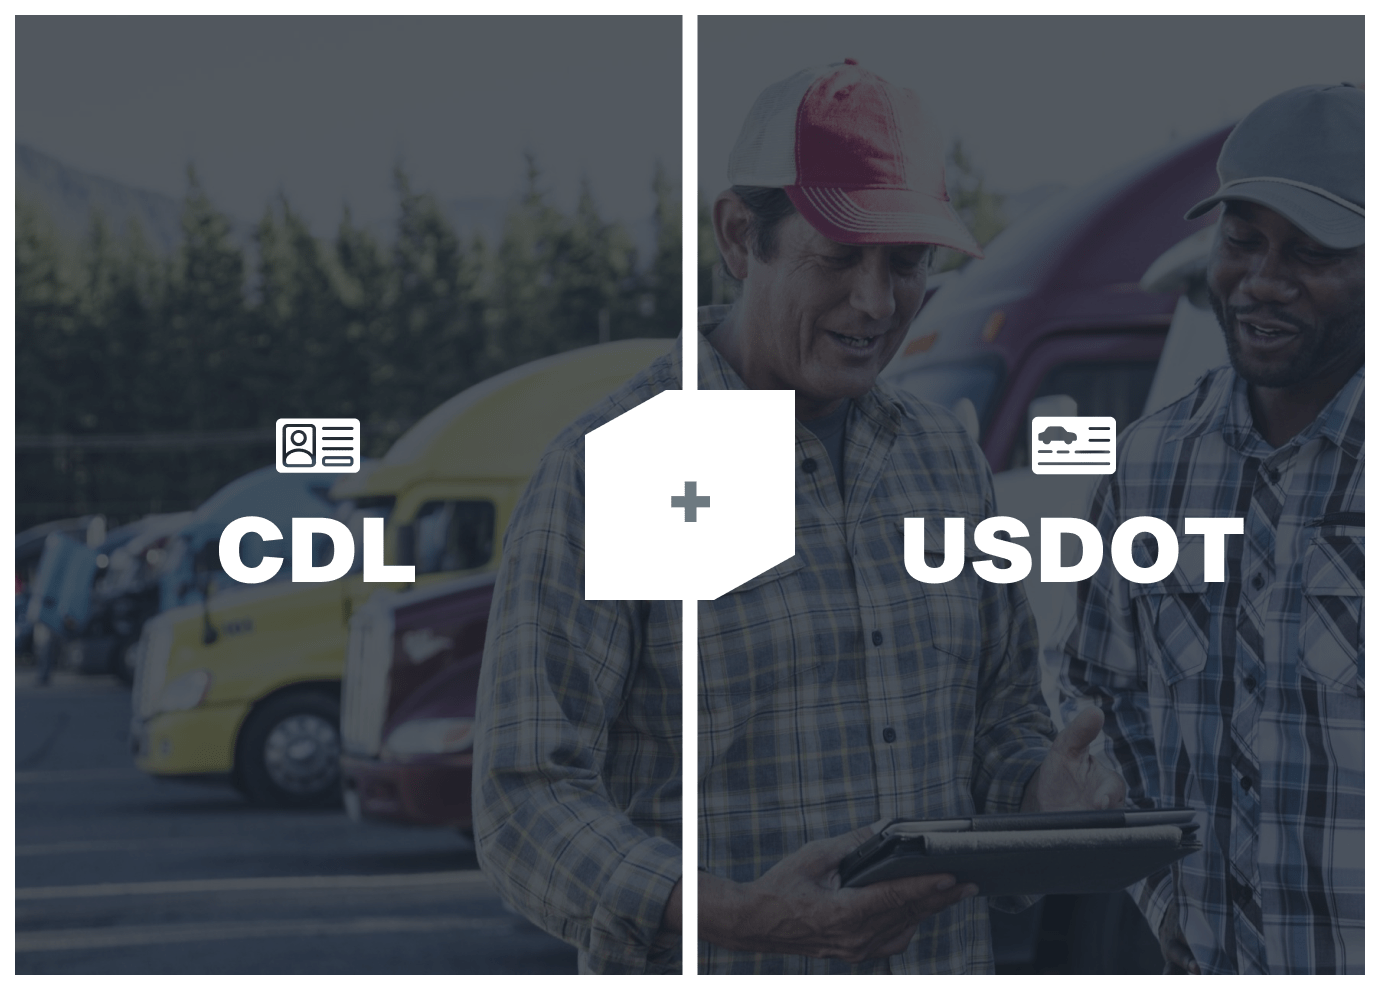 CDL and USDOT